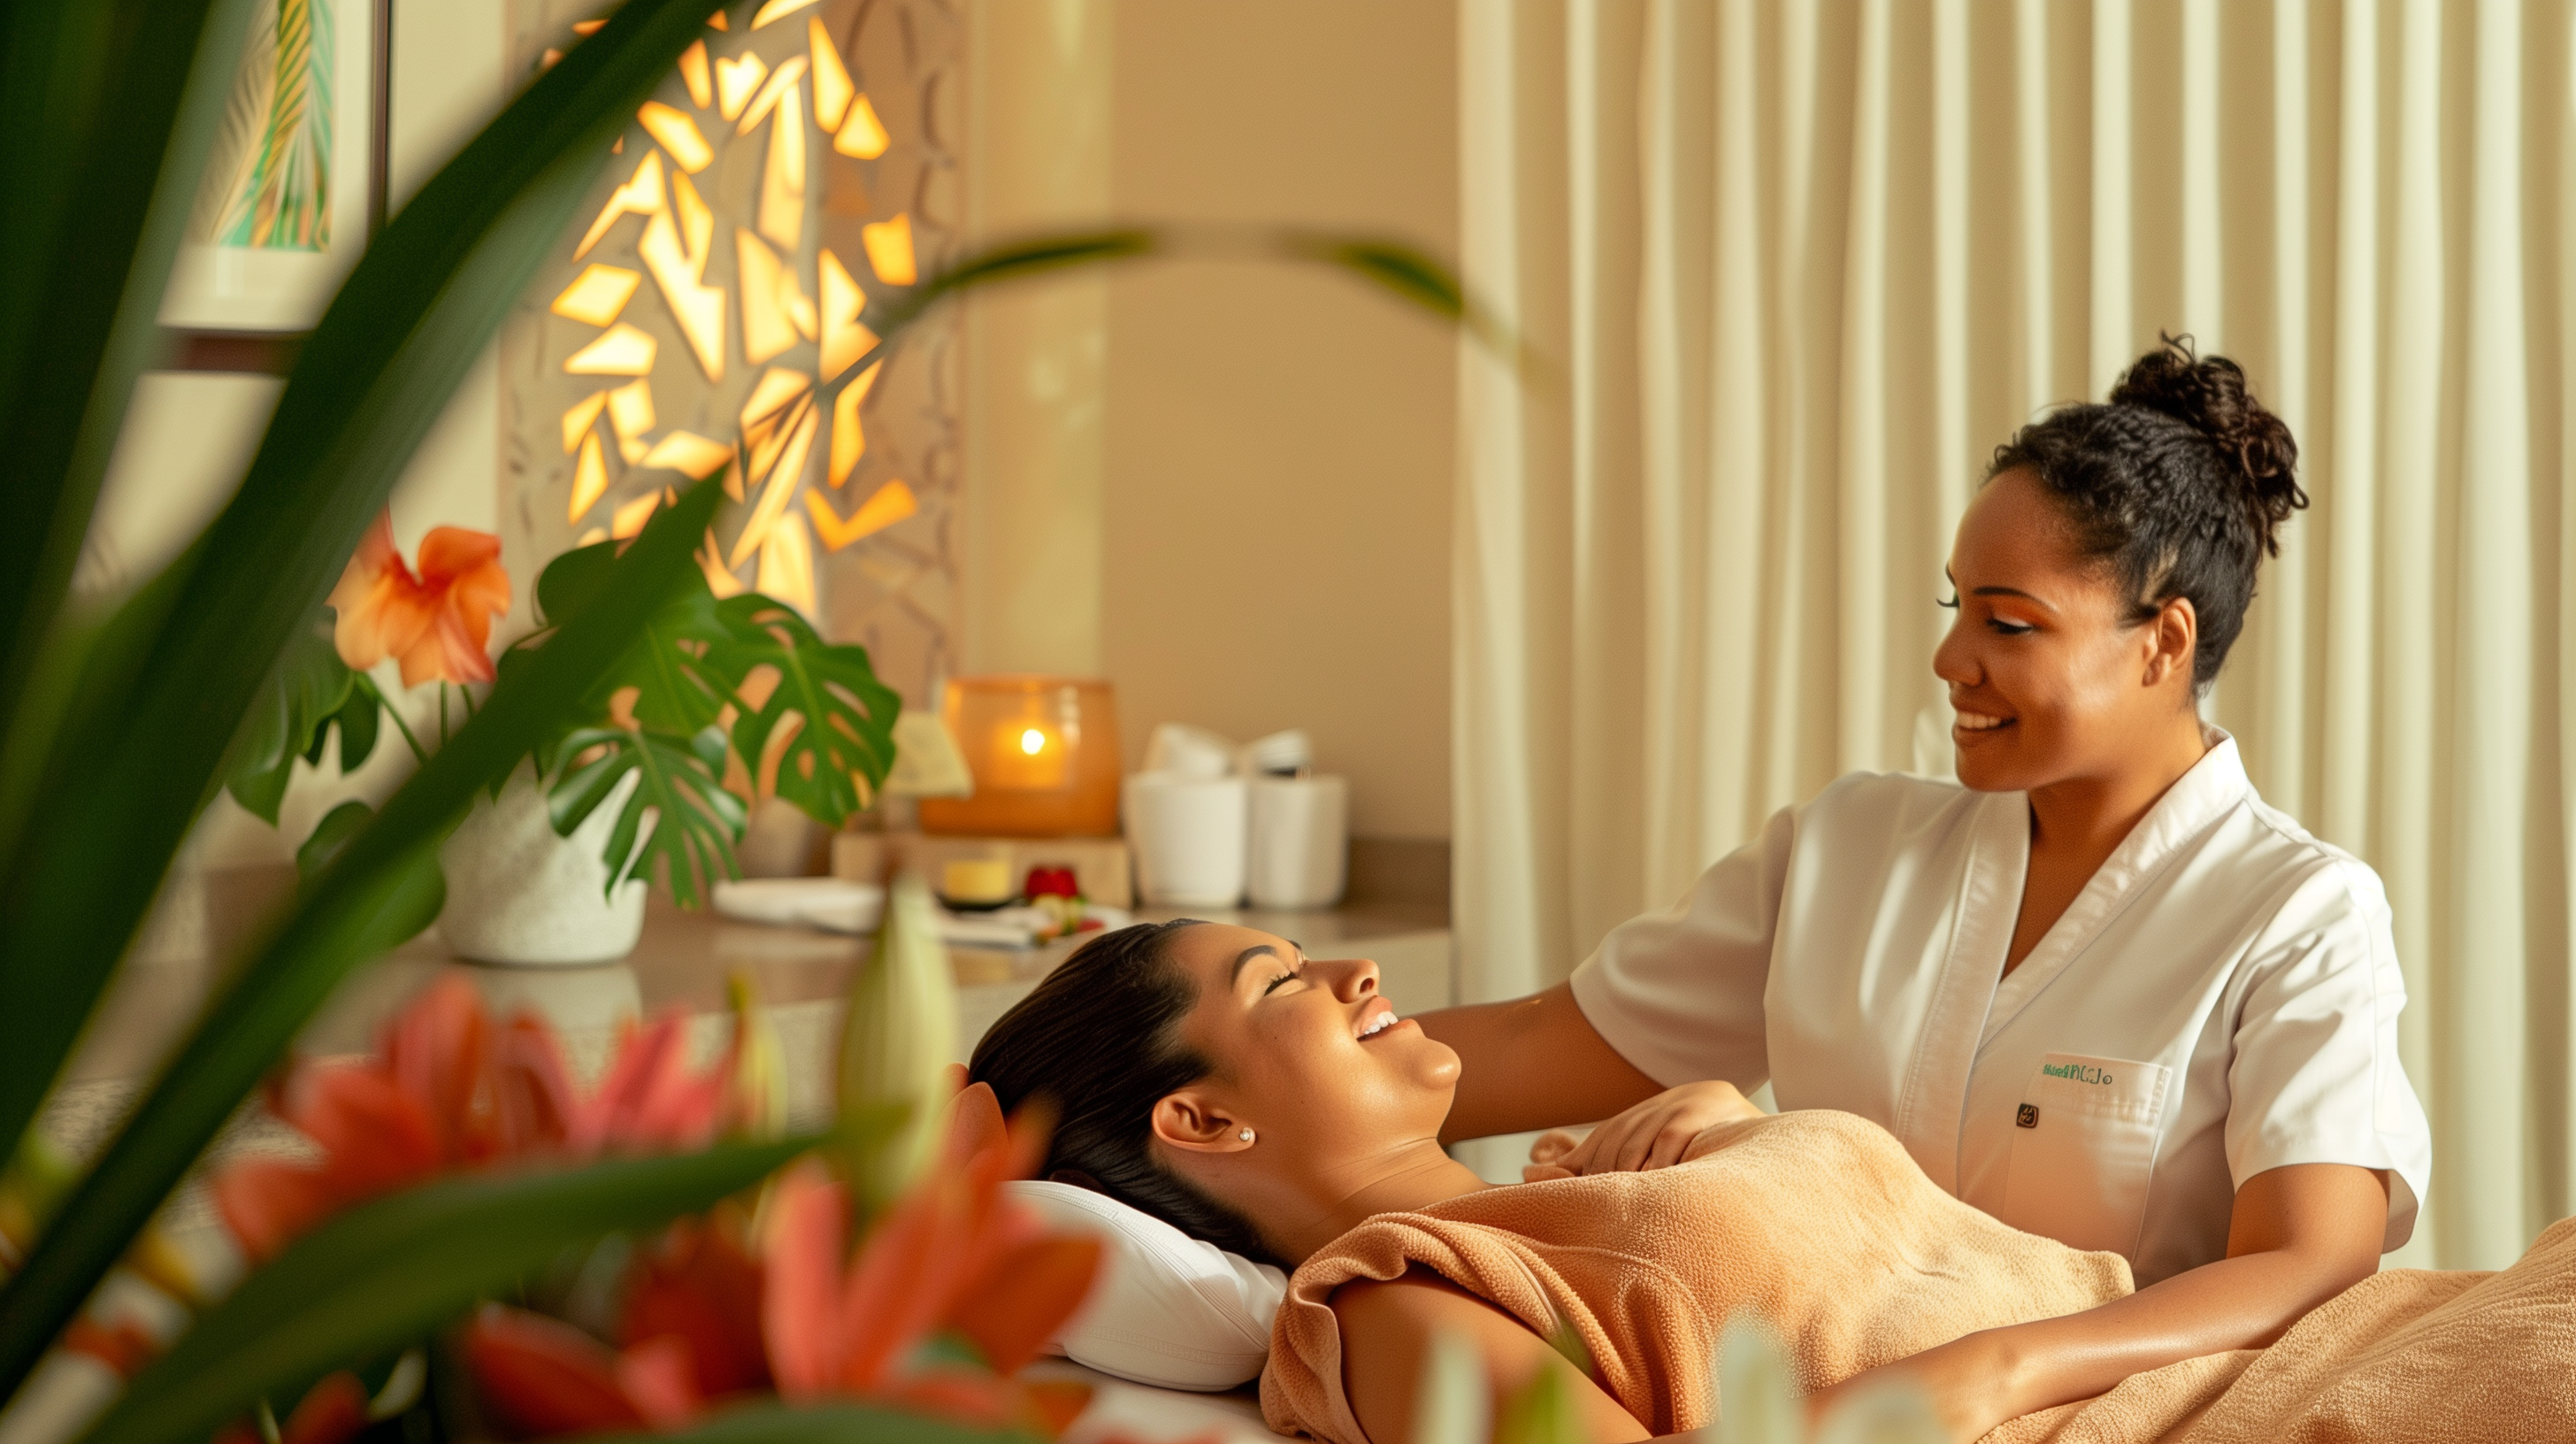 massage therapist and client talking in spa room